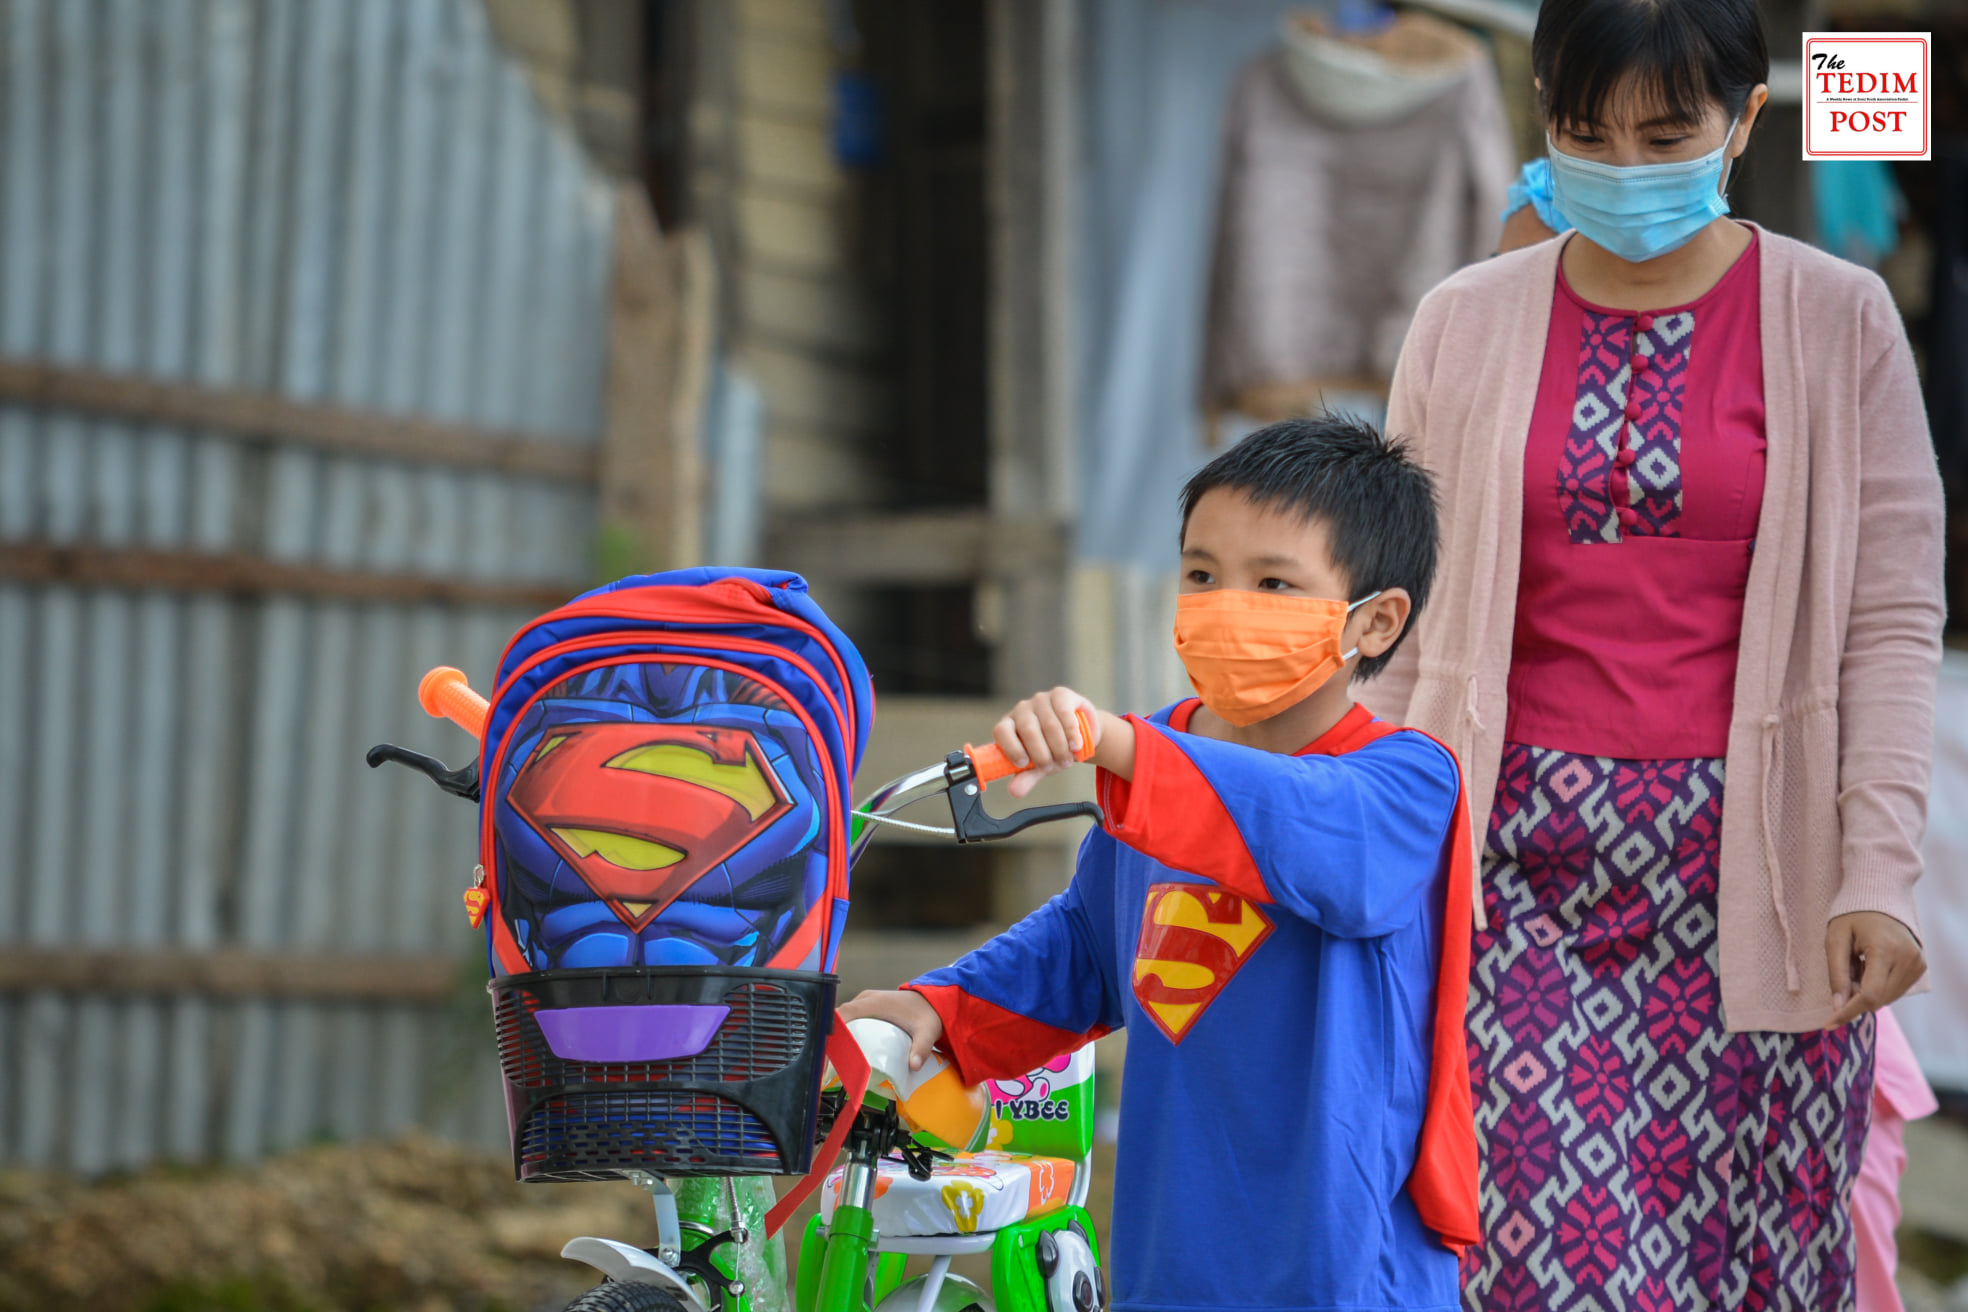 Nurses and doctors applaud him as he walks out of the hospital, some help him with the bicycle he just received and a superman kid backpack. By “him,” we mean a 6-year-old boy with a Superman costume given as a gift by Tedim General Hospital in Chin State.